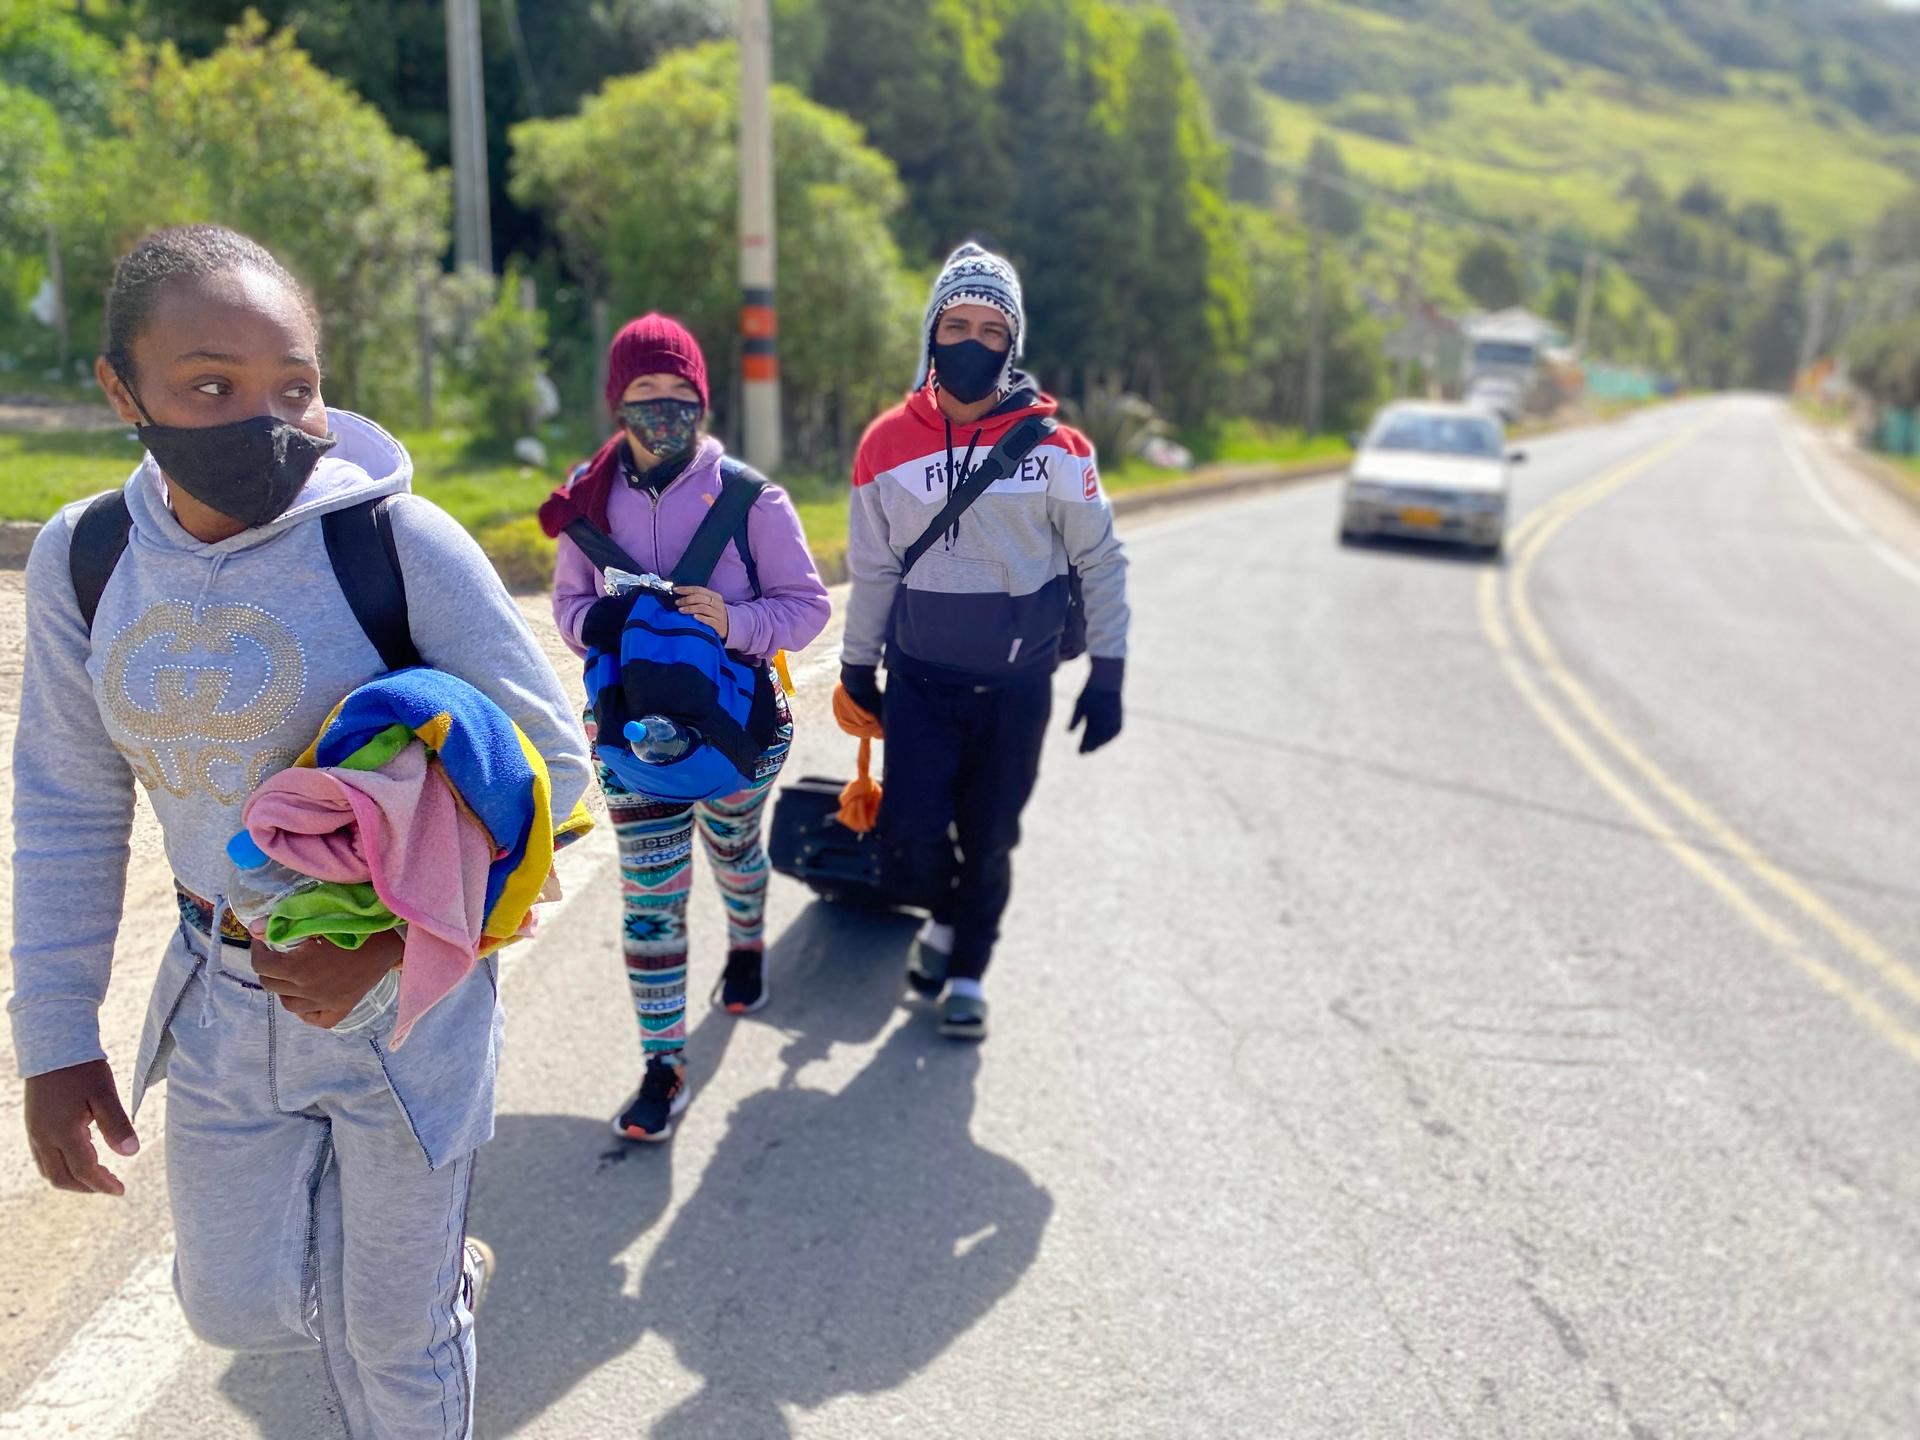 Daniel Arevalo drags his suitcase as he leaves the Colombian town of Pamplona on Oct 2. Arevalo had been on the road for two weeks and was trying to make it to Cali, Colombia, where he hoped to find construction work.